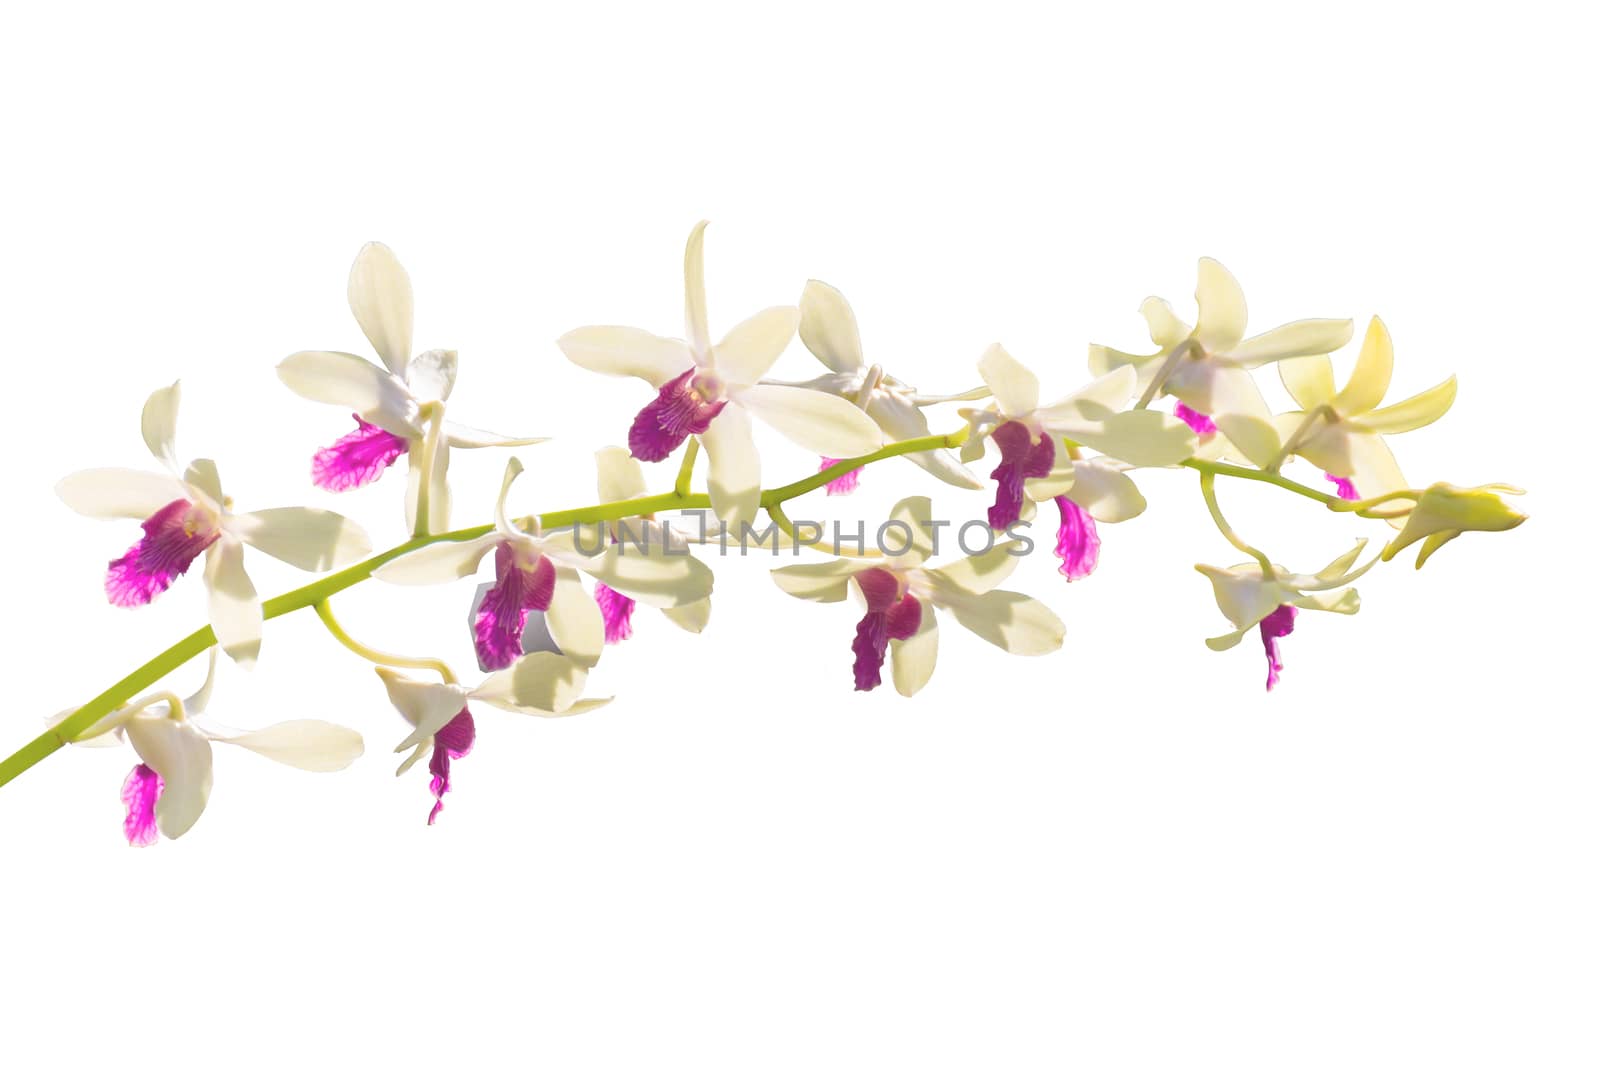 Image Of White And Pink Orchid Flowers Isolated On White Background